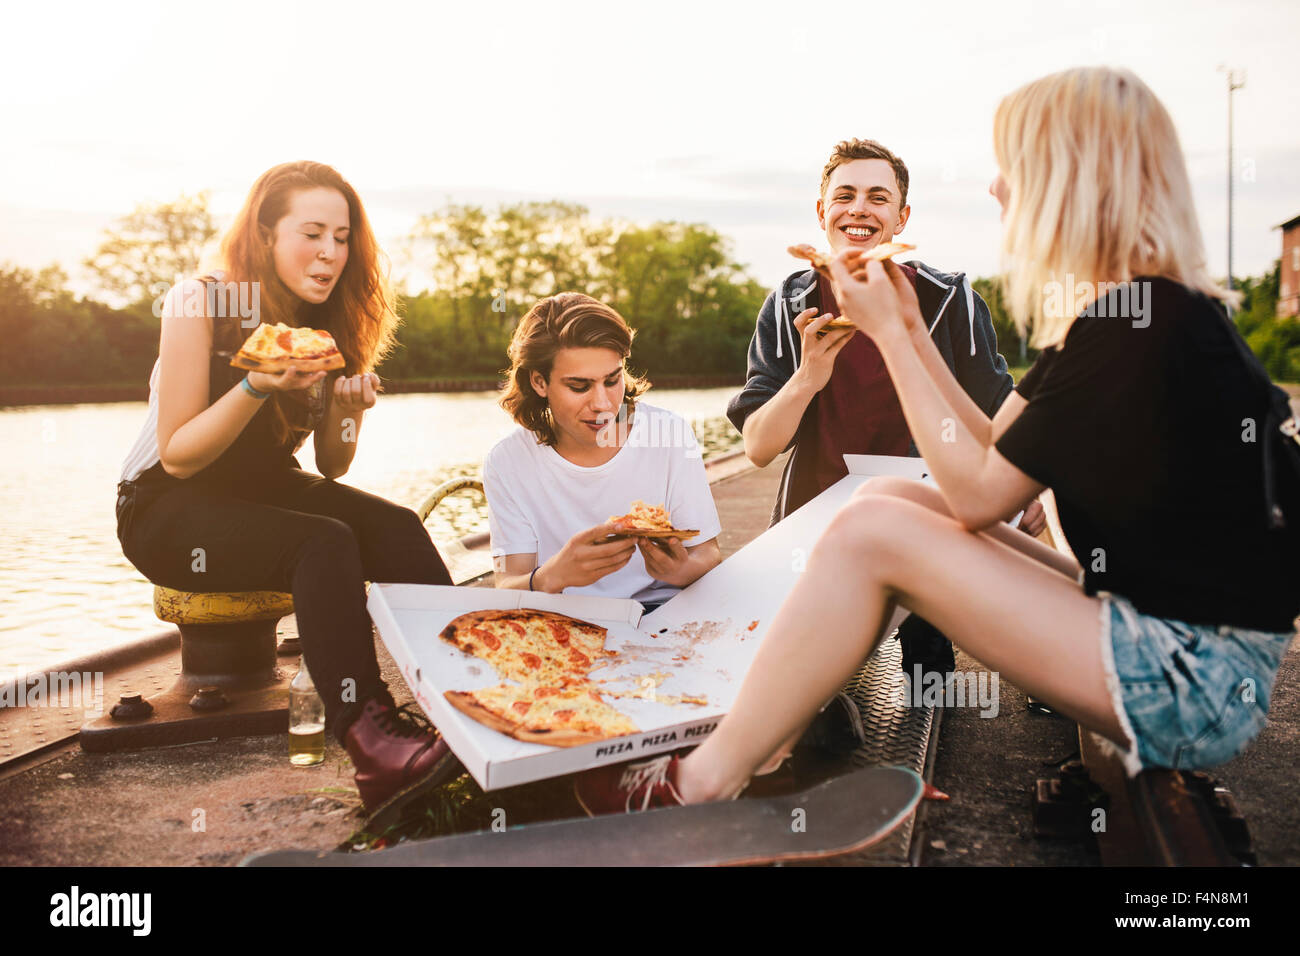 Friends sitting together outdoors sharing a pizza Stock Photo